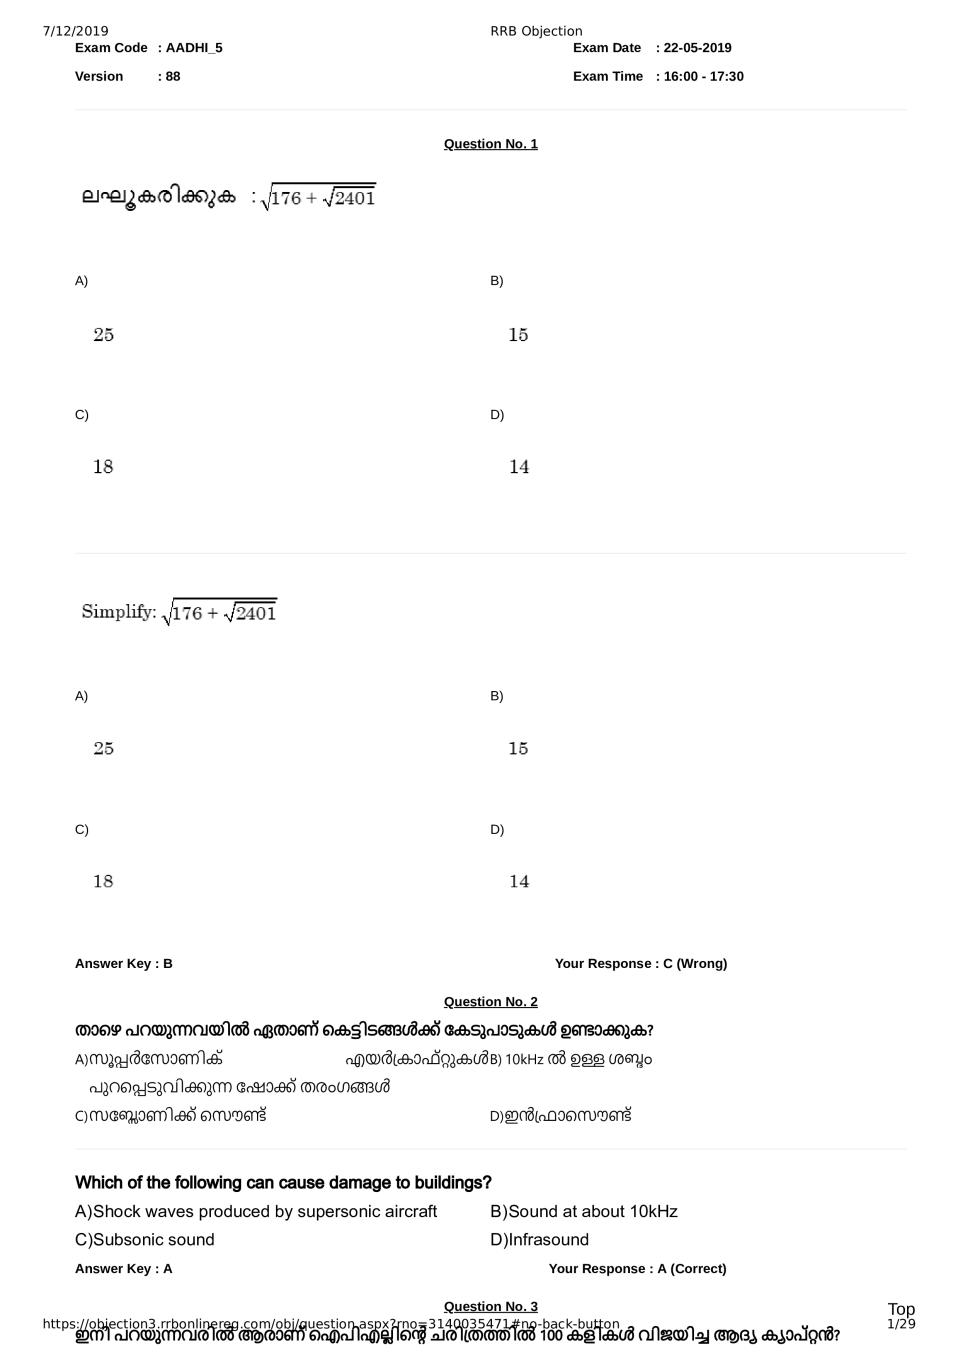 RRB JE Question Paper with Answers for 22 May 2019 Exam Shift 2 in Malyalam - Page 1